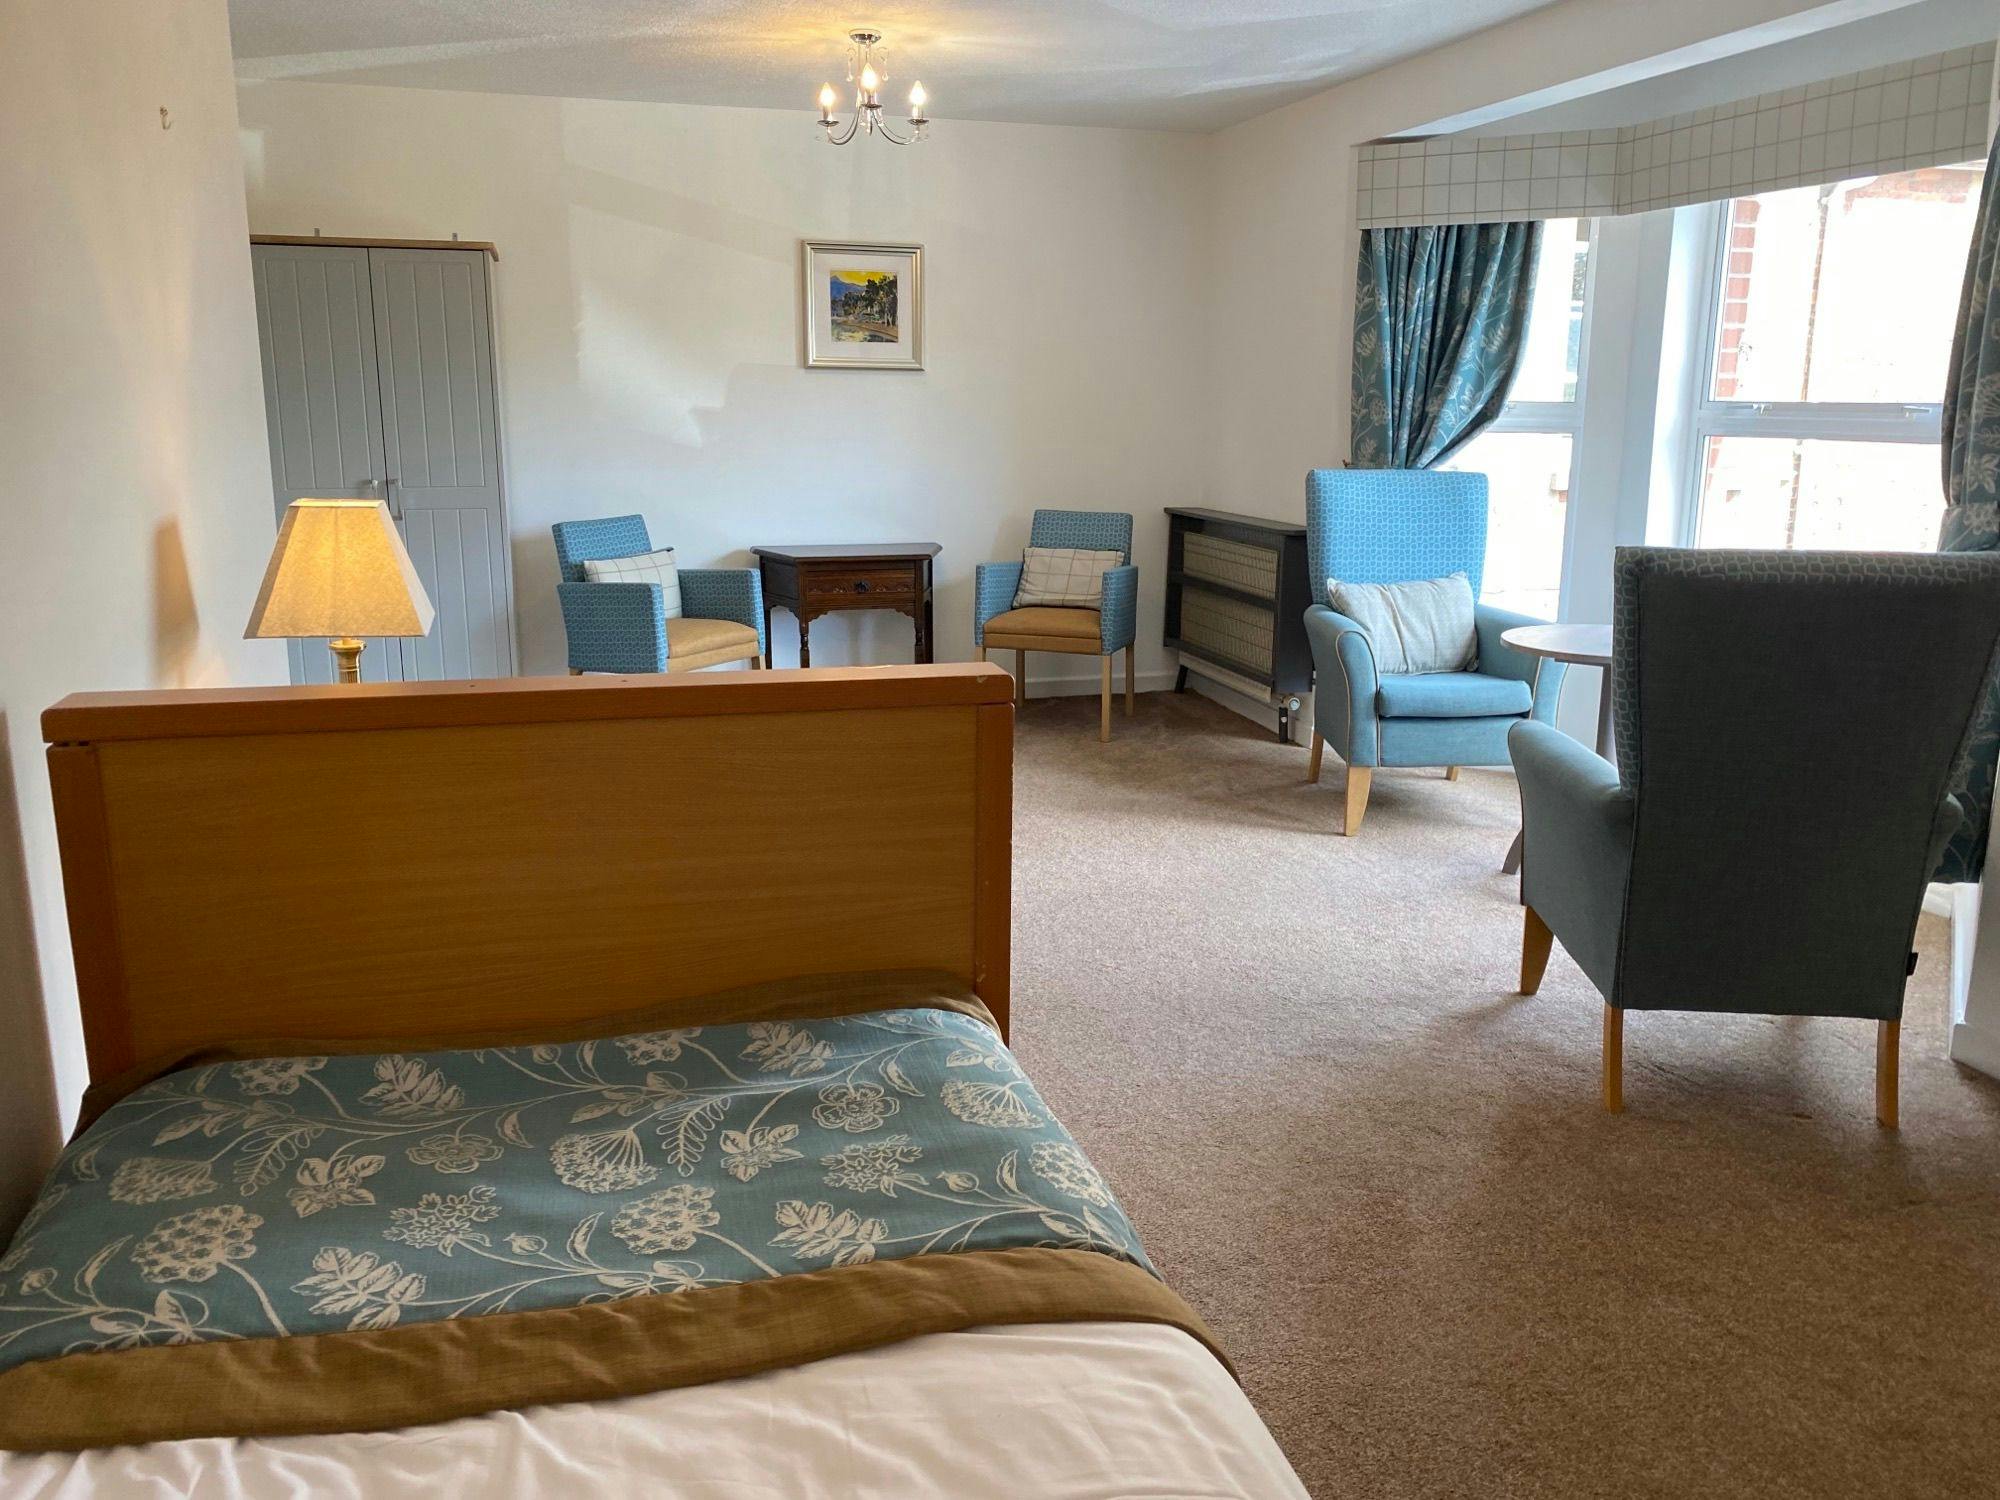 Bedroom of Holmer care home in Holmer, Hereford